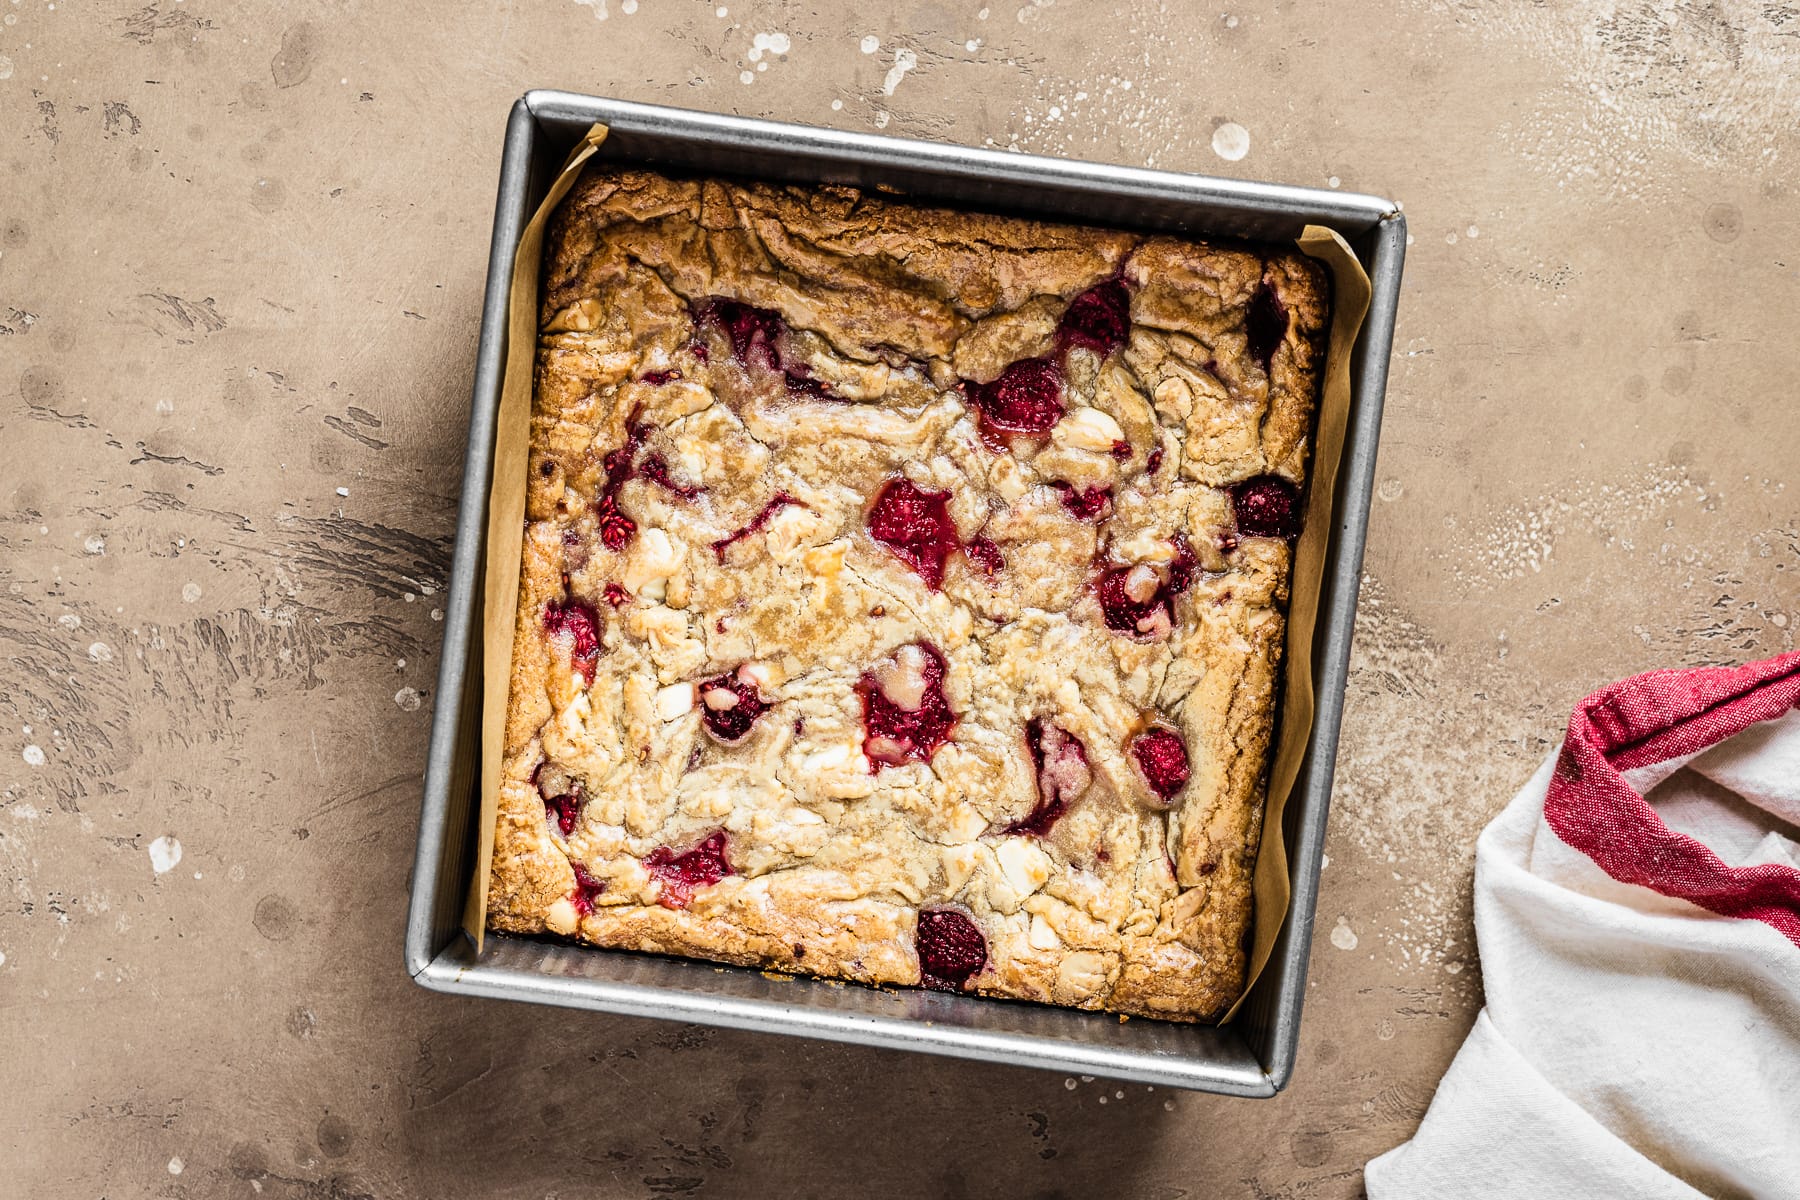 A square pan of baked blondies on a tan stone surface with a red and white napkin at bottom right.